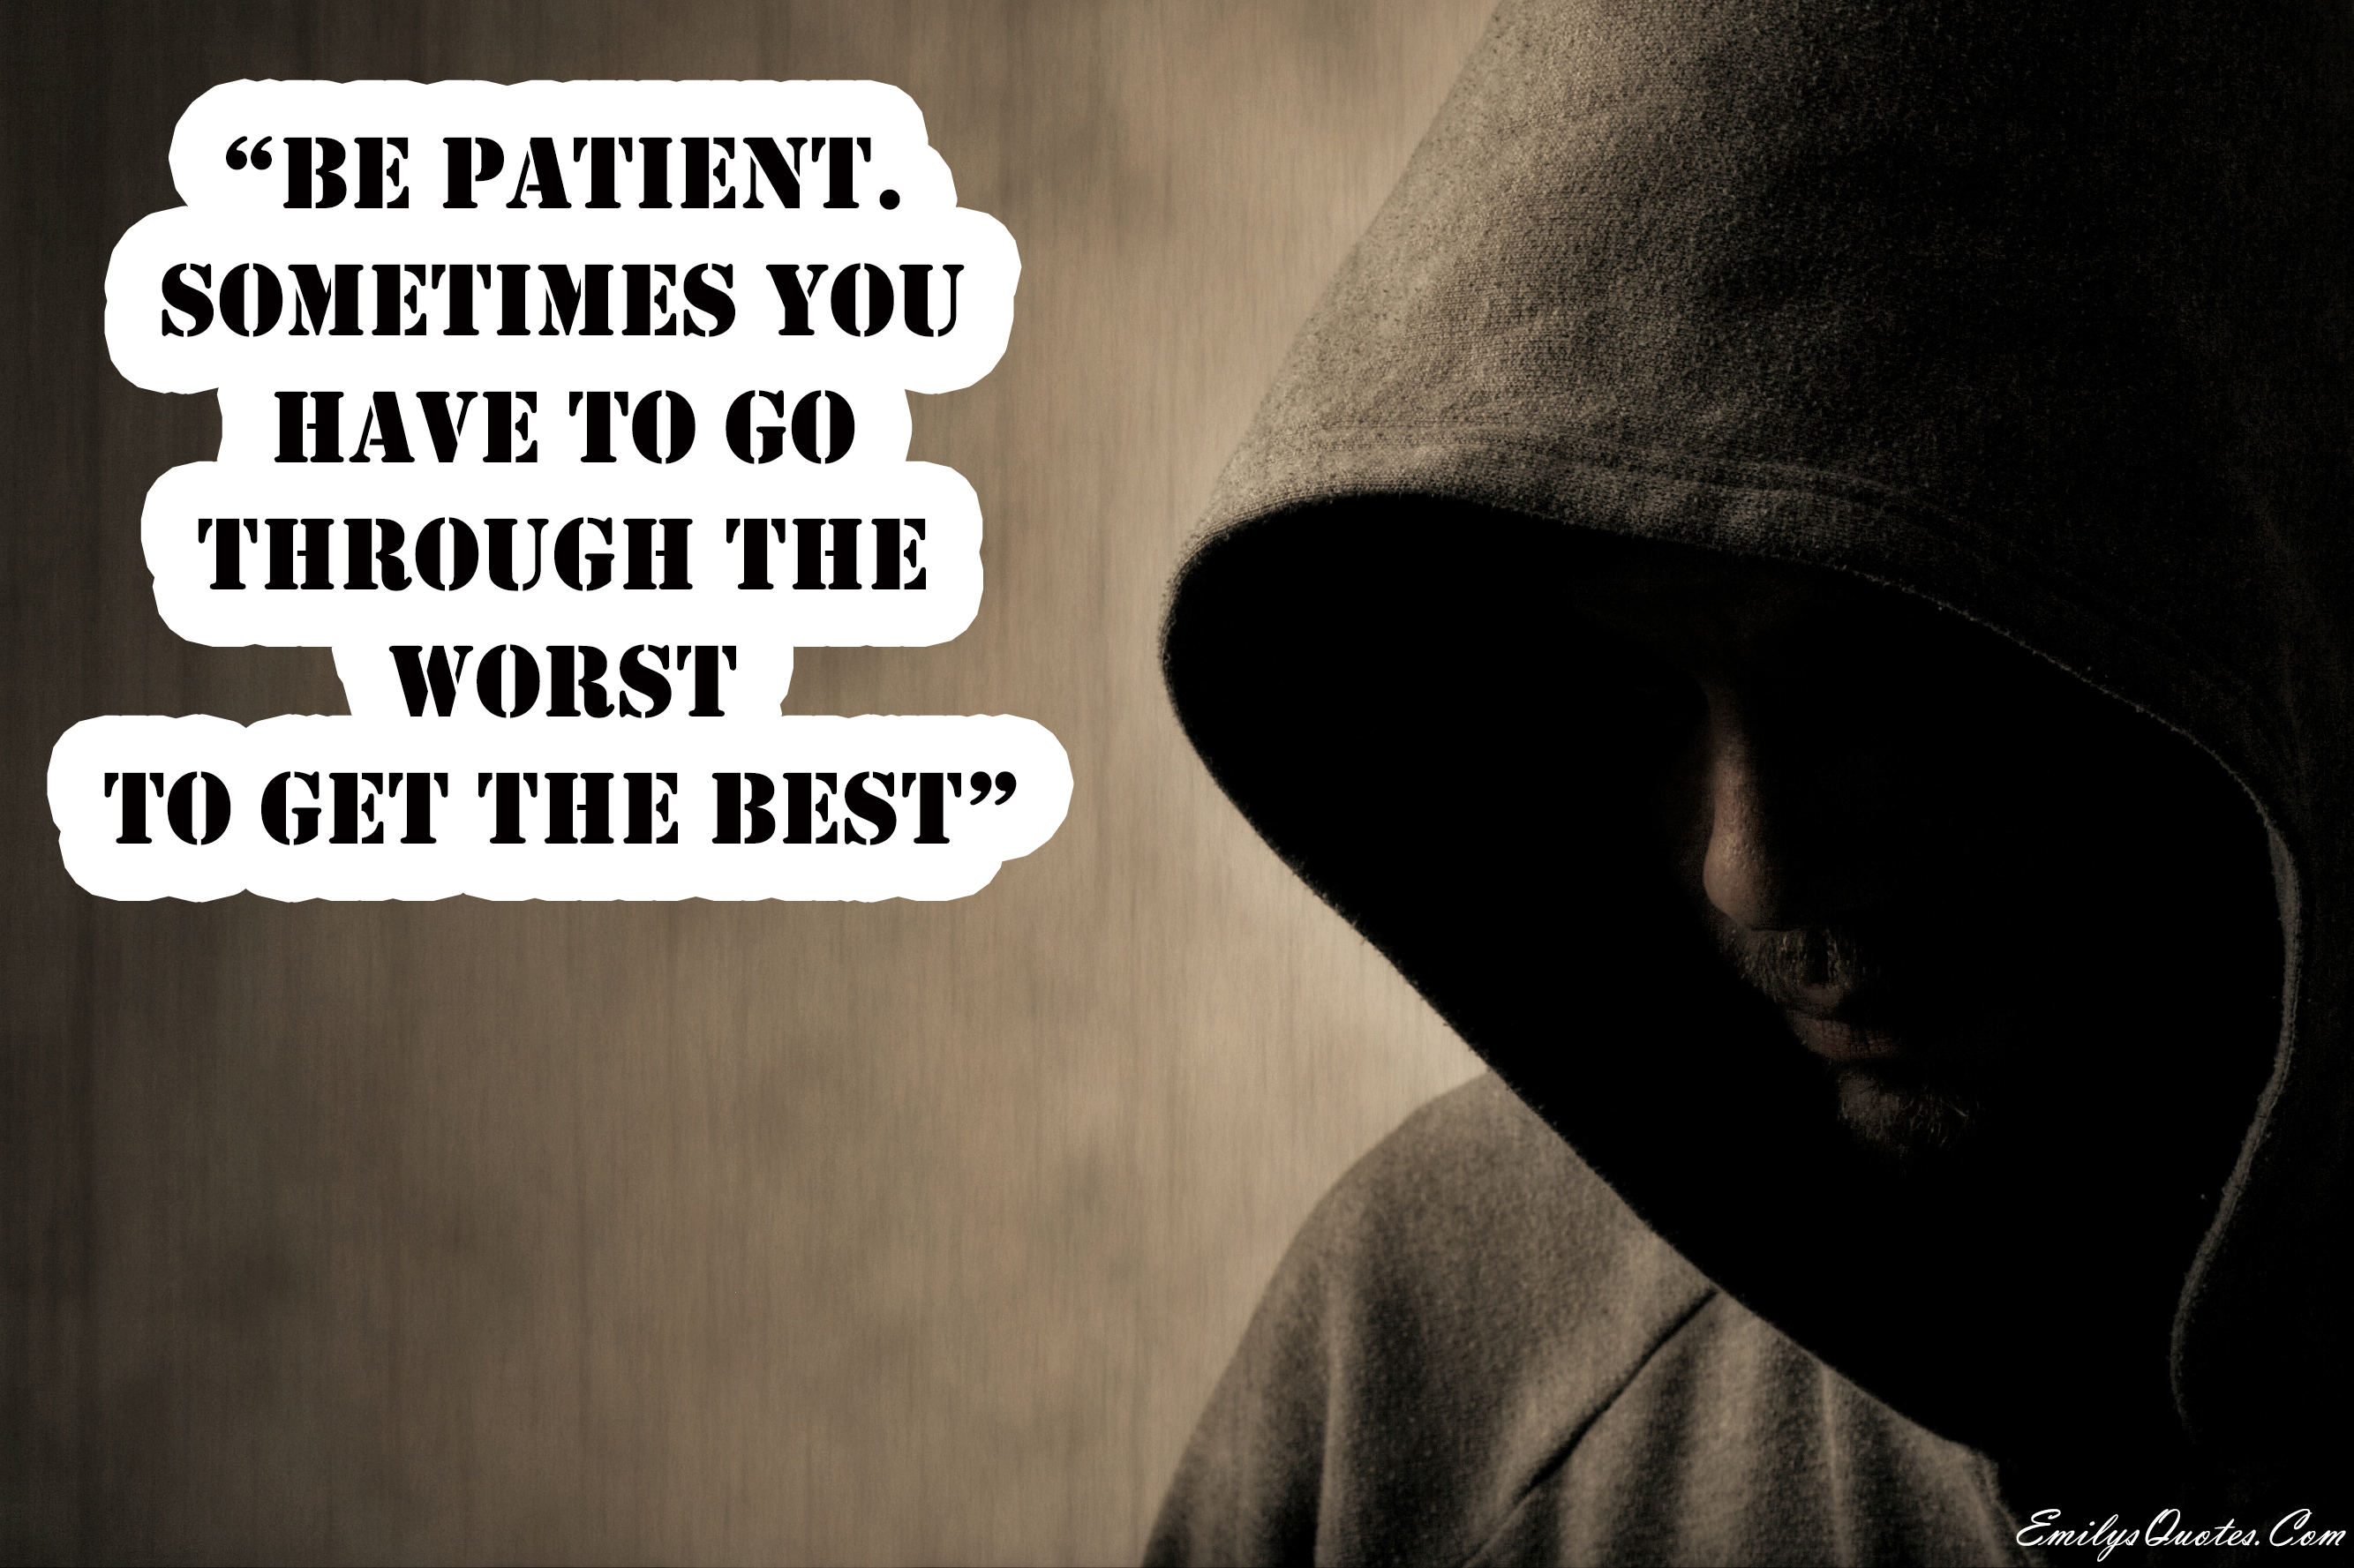 Be patient, sometimes you have to go through the worst to get the best